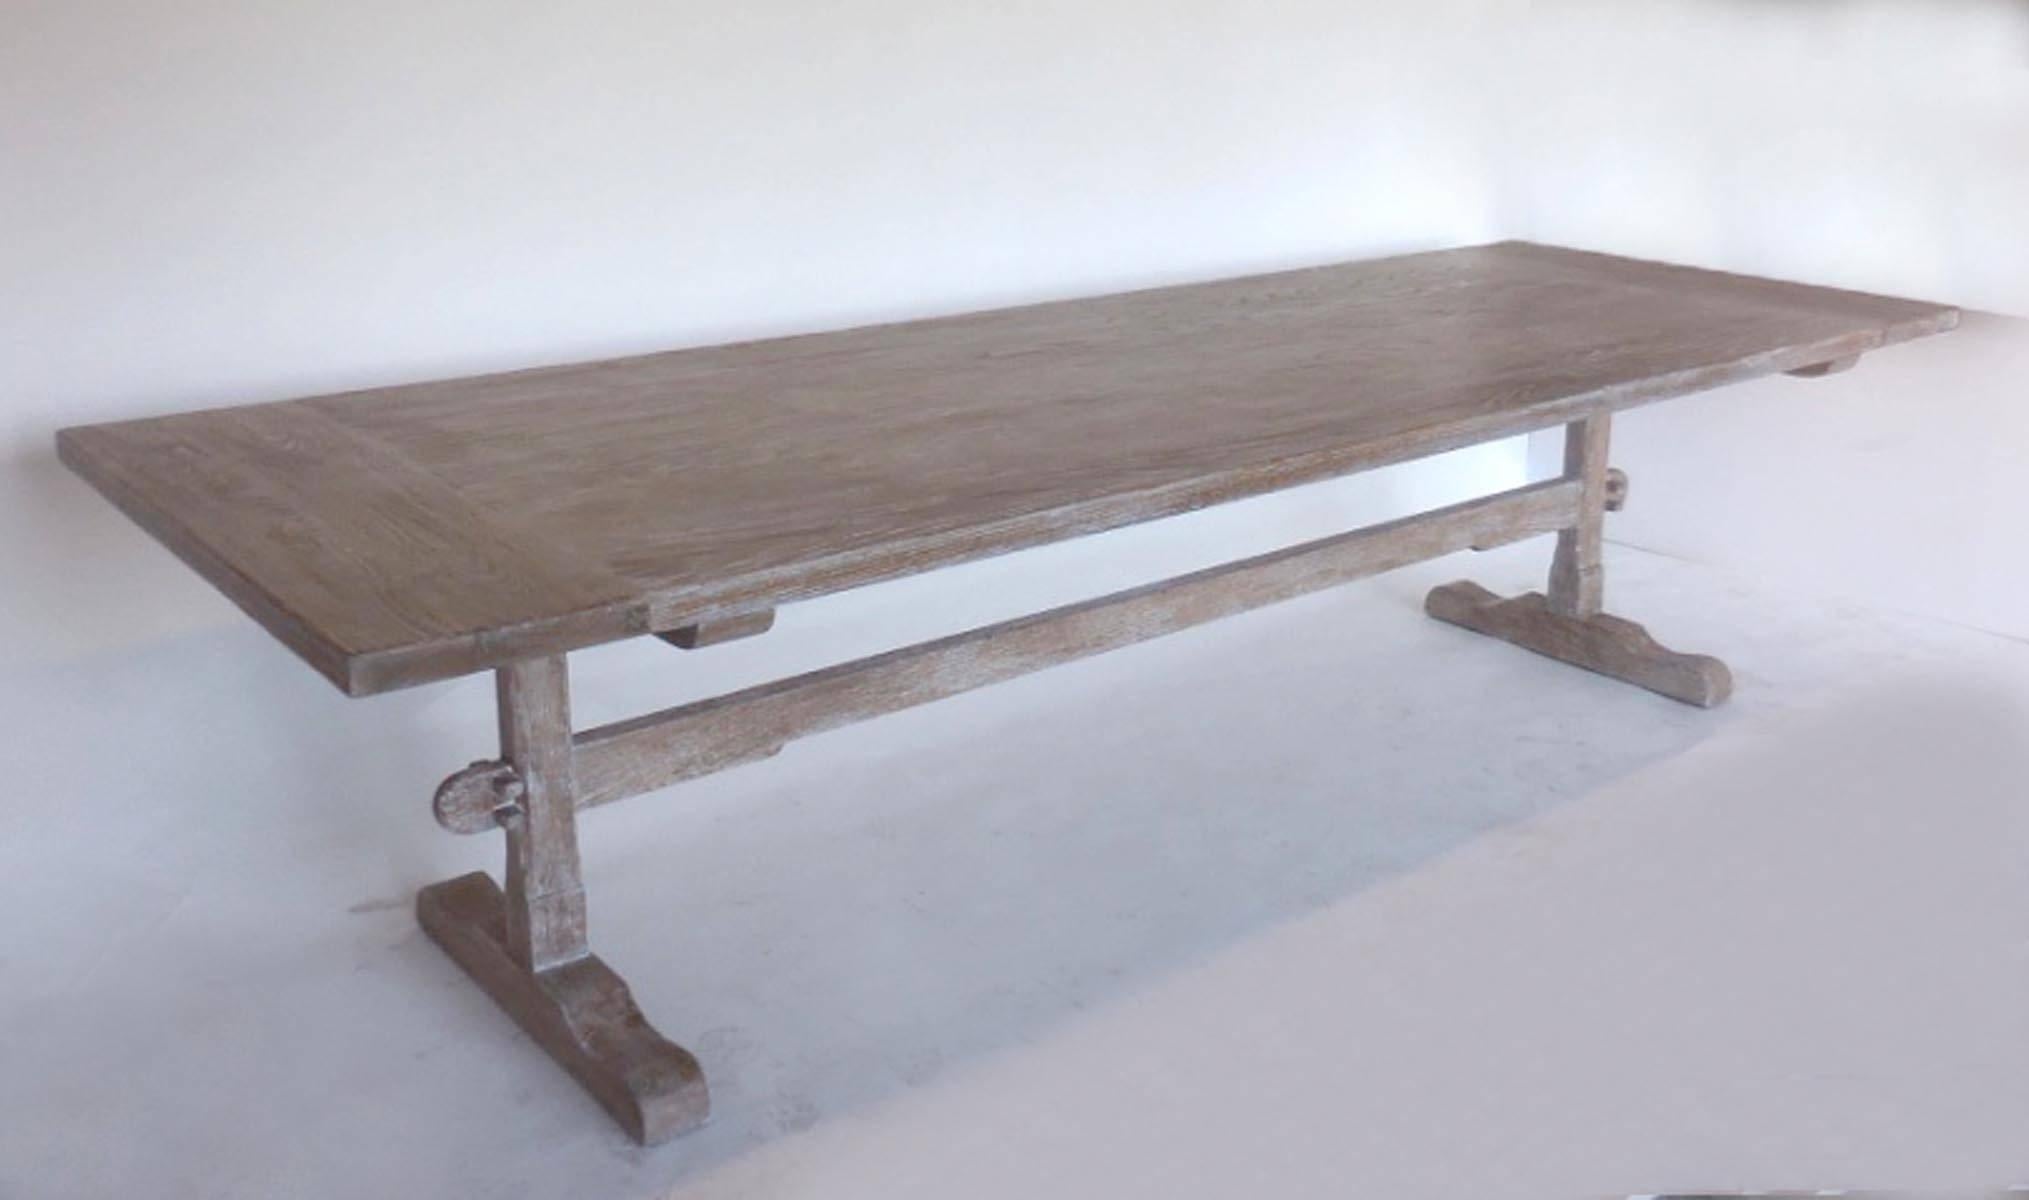 Custom classic trestle table in oak with an opened grain ceruse finish, done in a snow on sand color. Wide breadboards, delicate features. Beautiful. Top thickness is about one and three quarters thick.
Can be made in any size and finish, in oak,